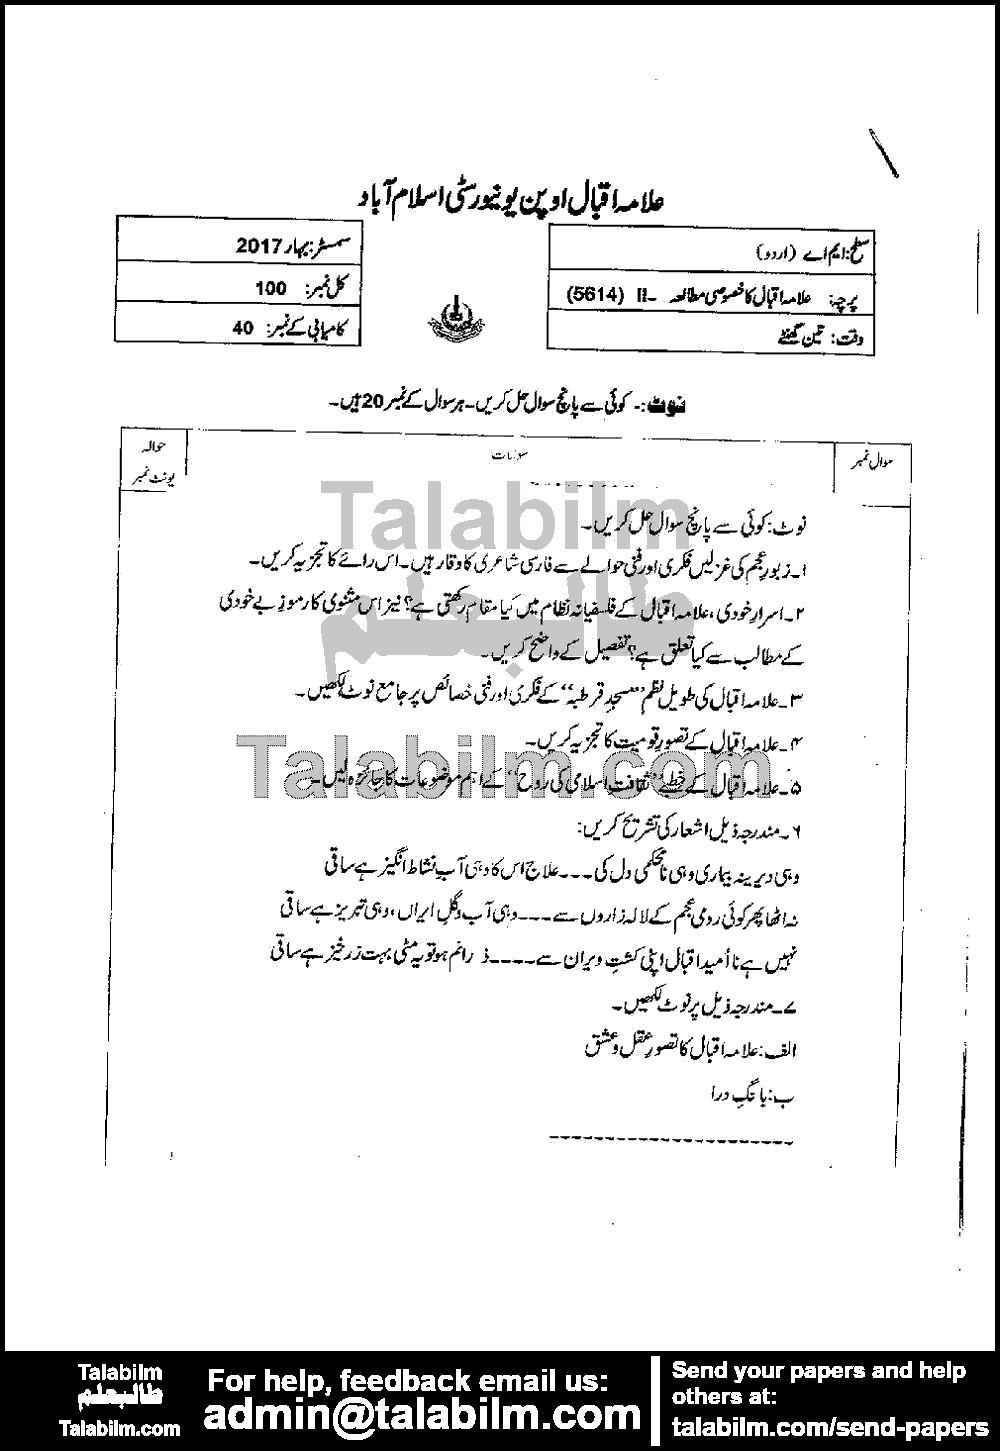 Specific Study of Allama Iqbal-II 5614 past paper for Spring 2017